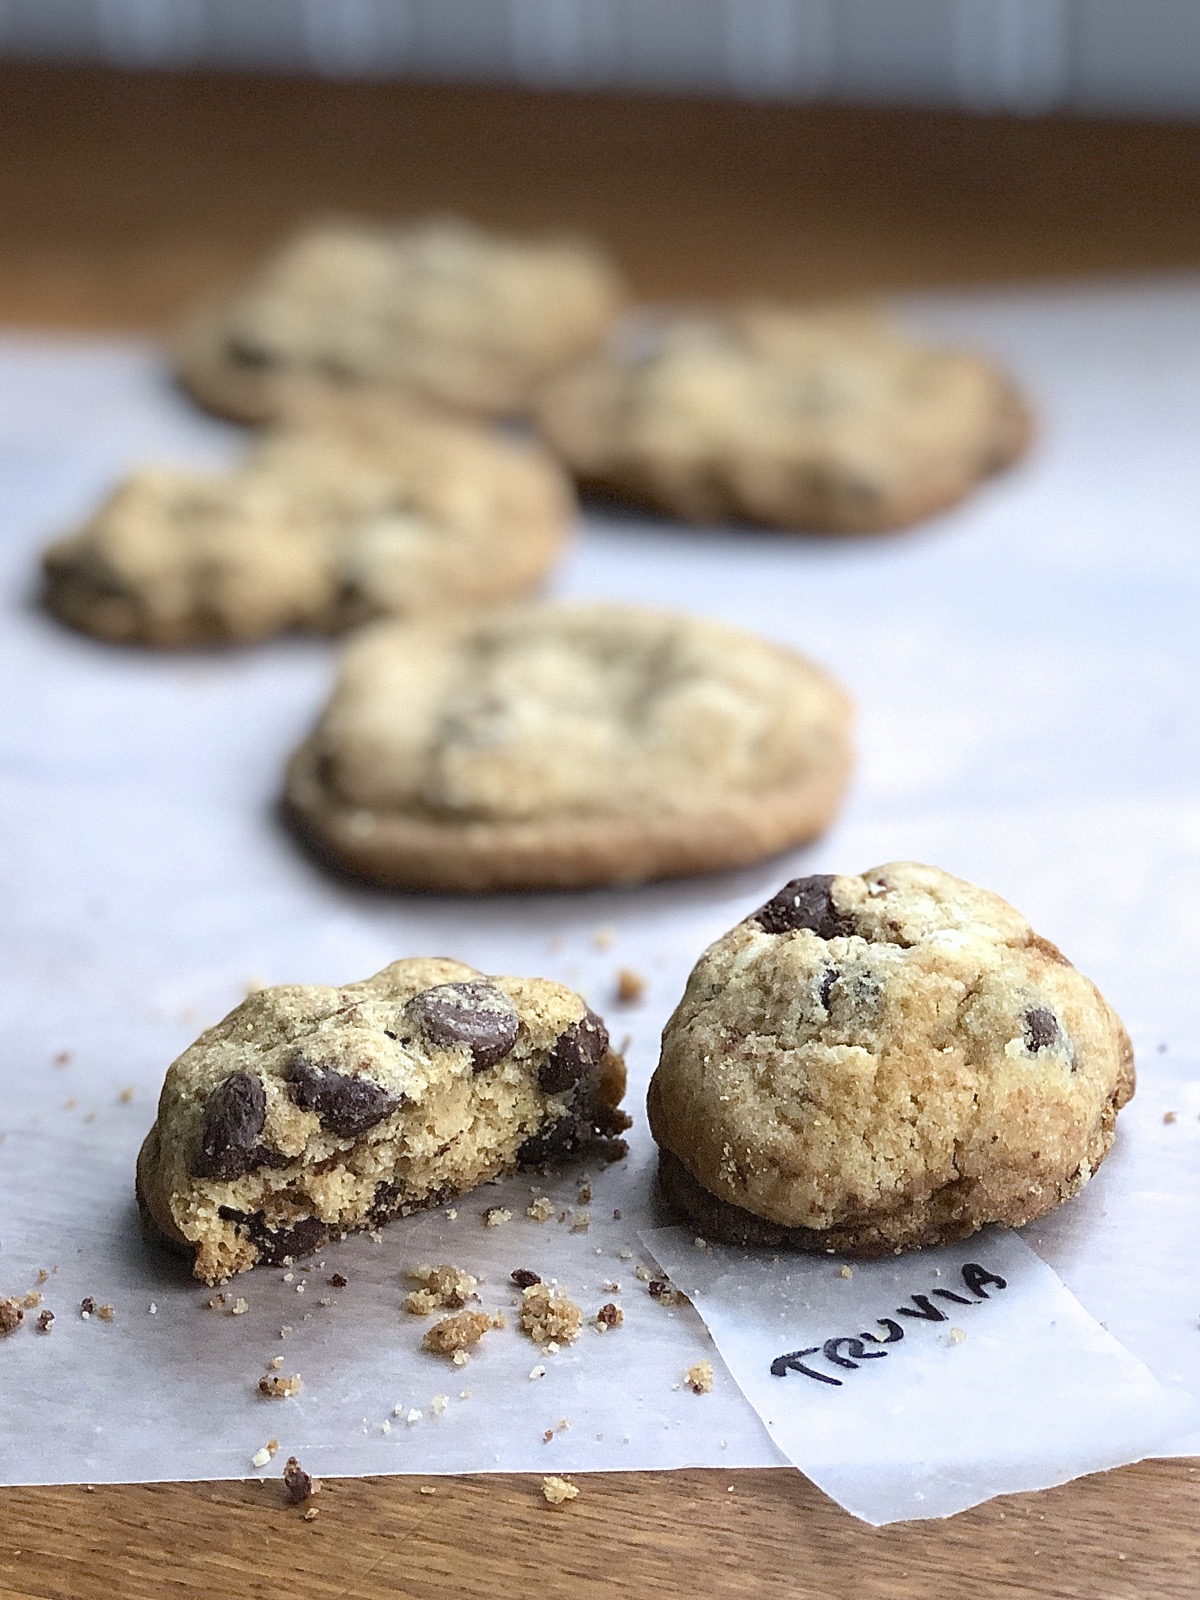 Chocolate chip cookies baked with Truvia, showing their thick texture and crumbliness.